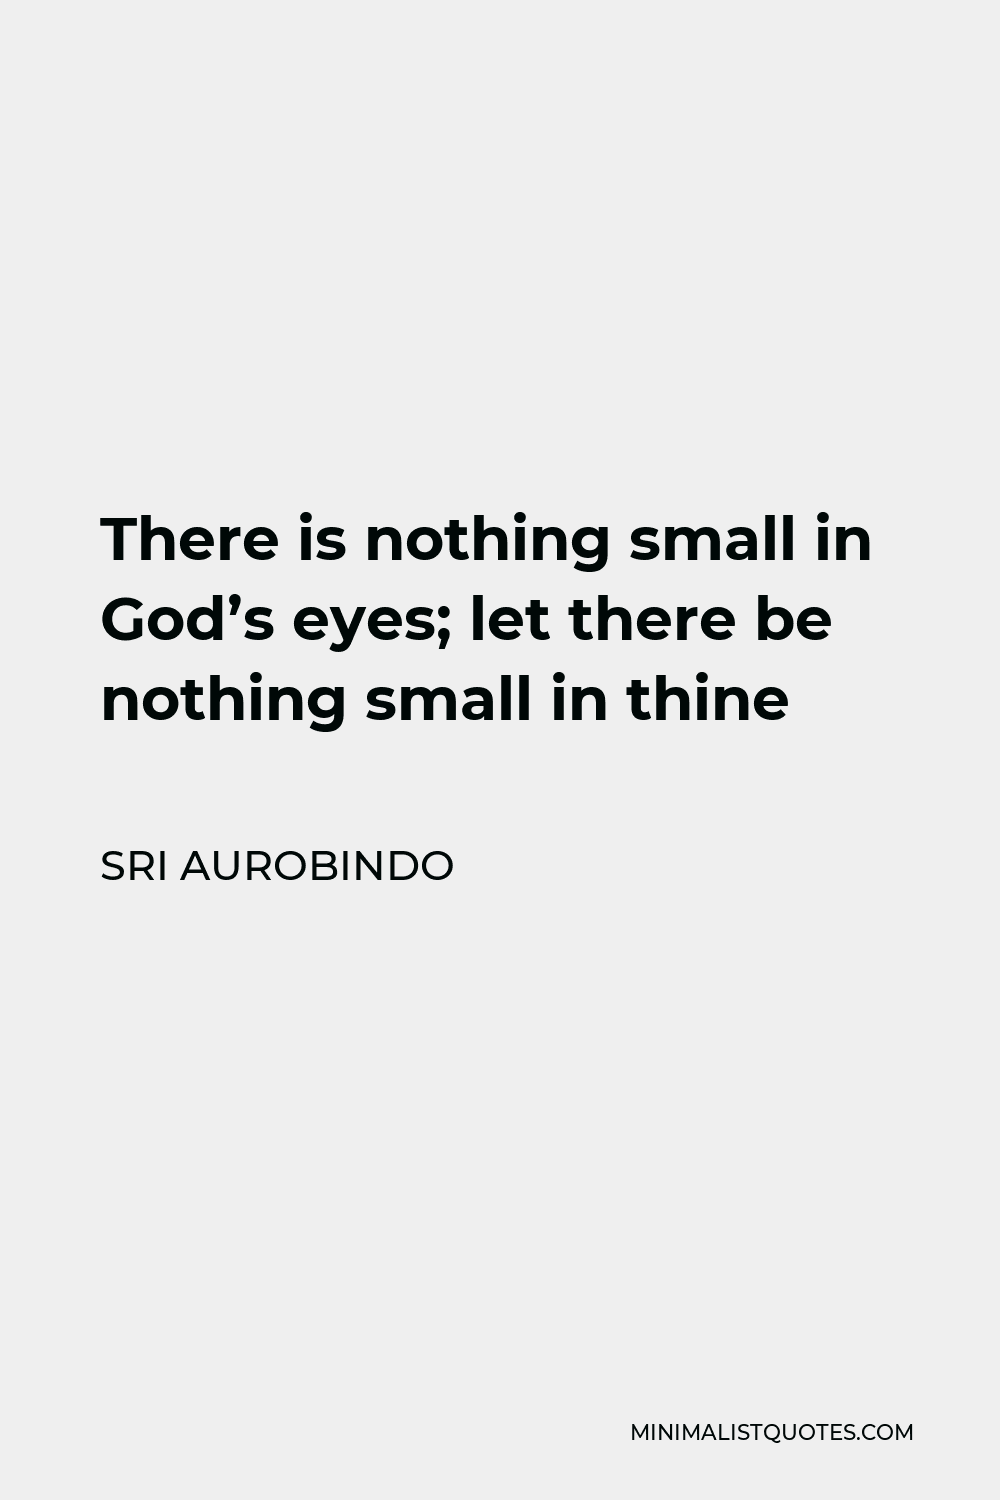 Sri Aurobindo Quote - There is nothing small in God’s eyes; let there be nothing small in thine